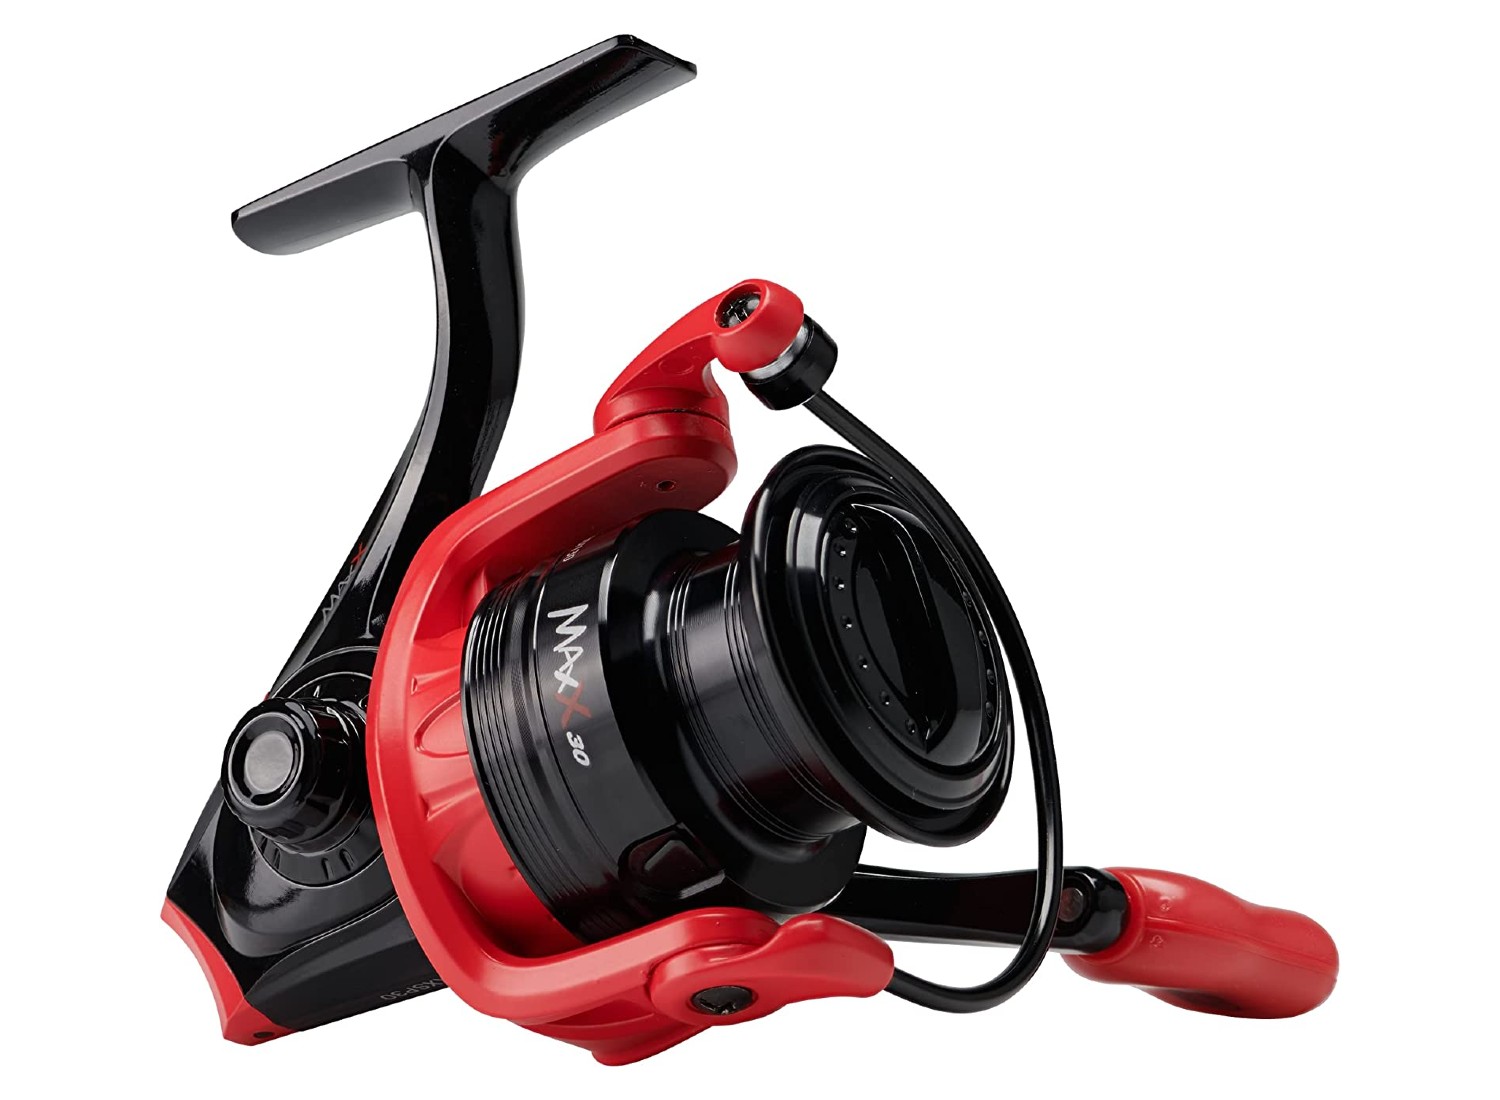 Are Spincast Reels Any Good?